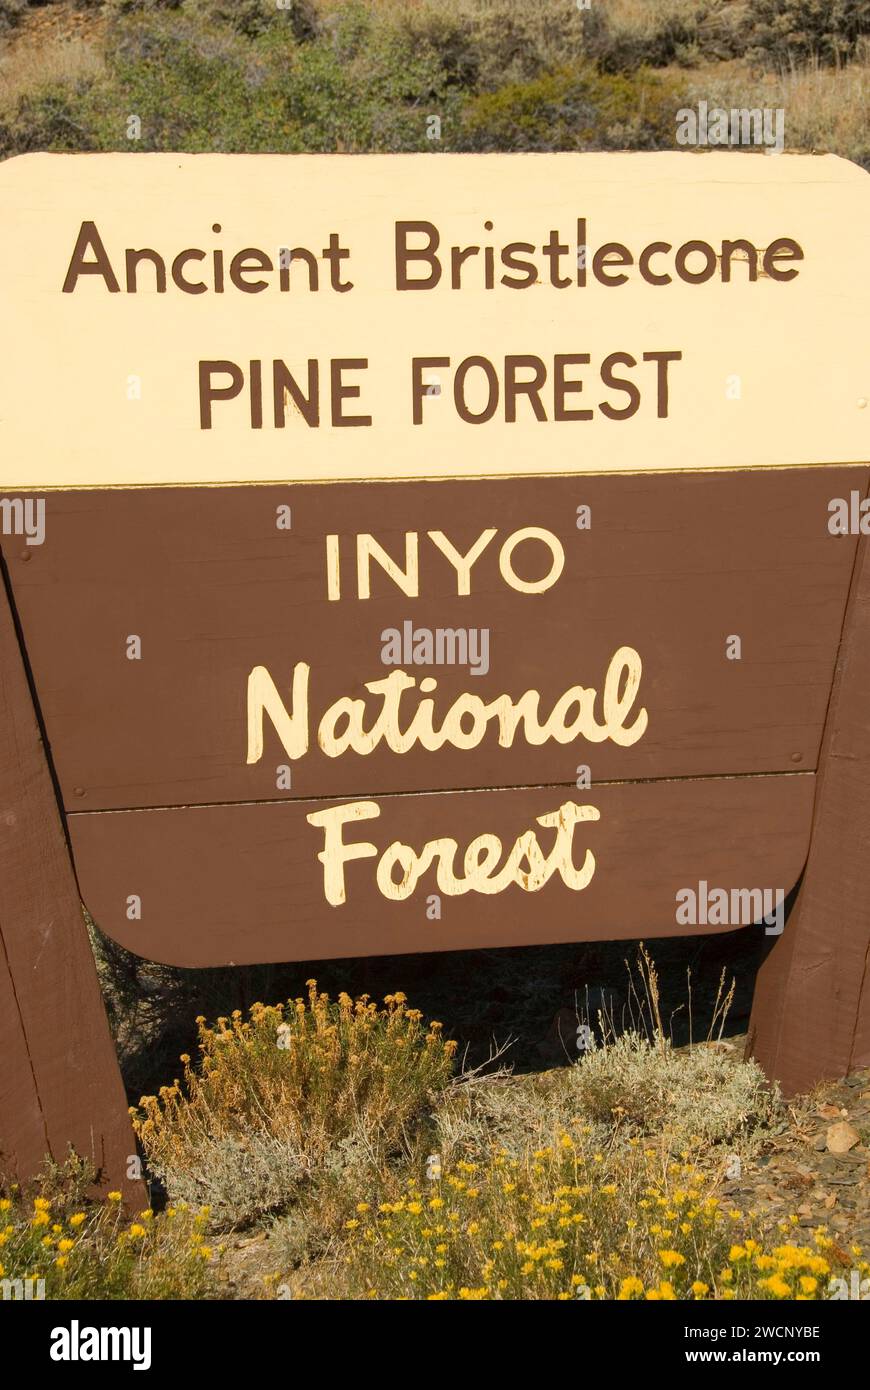 Entrance sign, Ancient Bristlecone Pine Forest, Ancient Bristlecone National Scenic Byway, Inyo National Forest, California Stock Photo